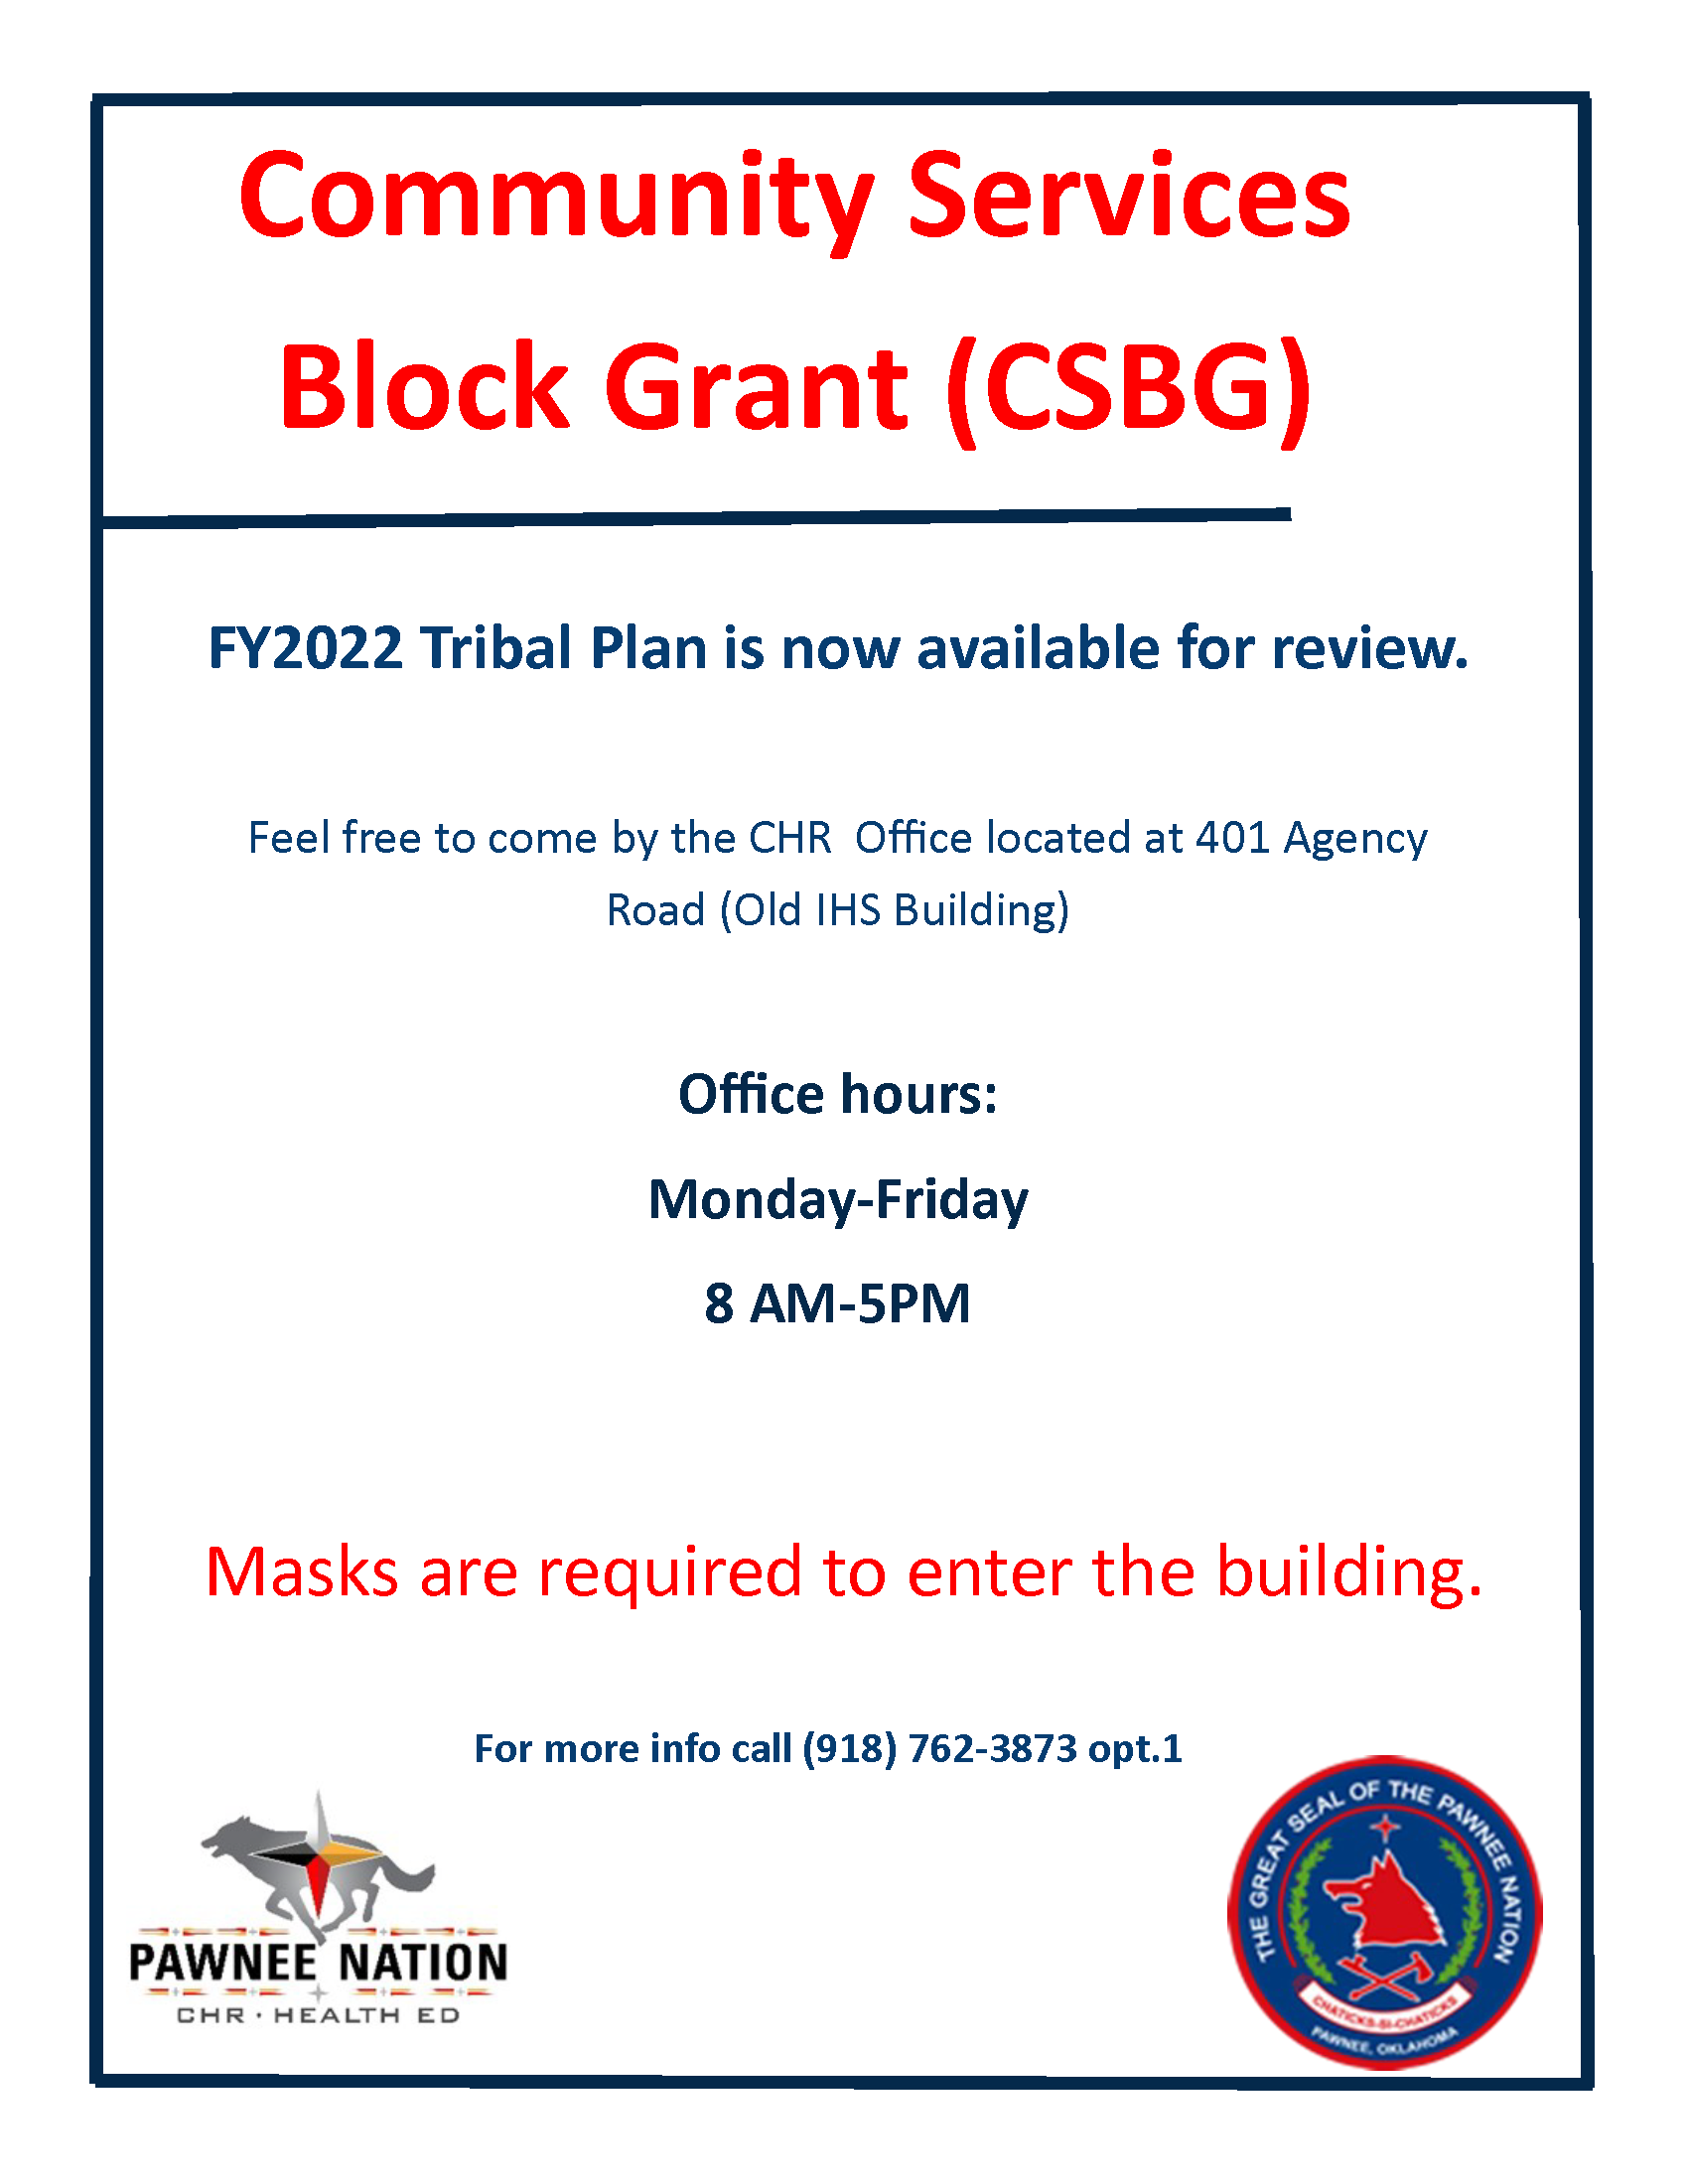 Community Services Block Grant (CSBG) Come by the CHR Office for more